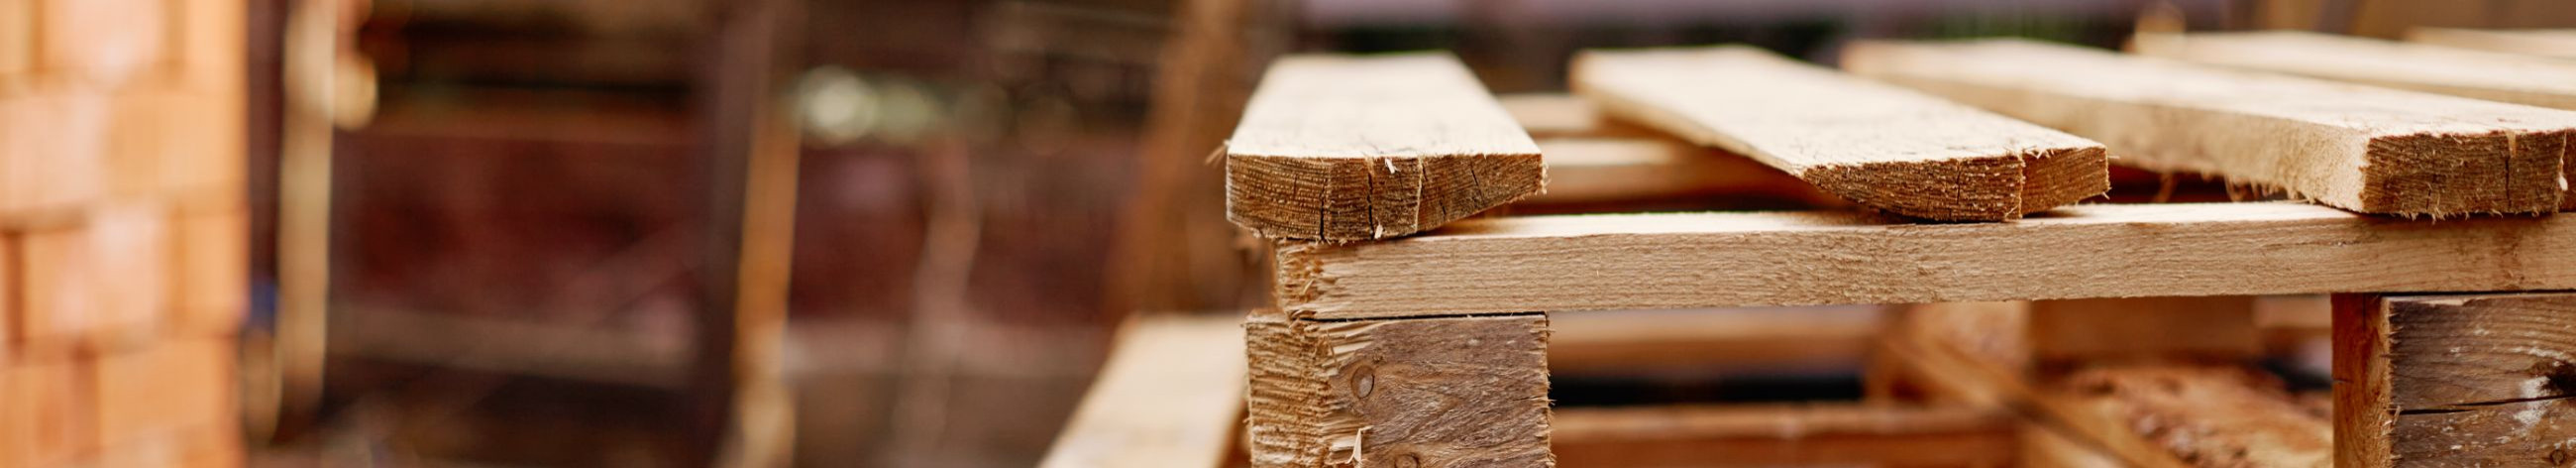 timber buying and selling, Pallets, underpillars, timber industry, timber trade, wooden pallets, buying timber, selling timber, pallet suppliers, custom pallets